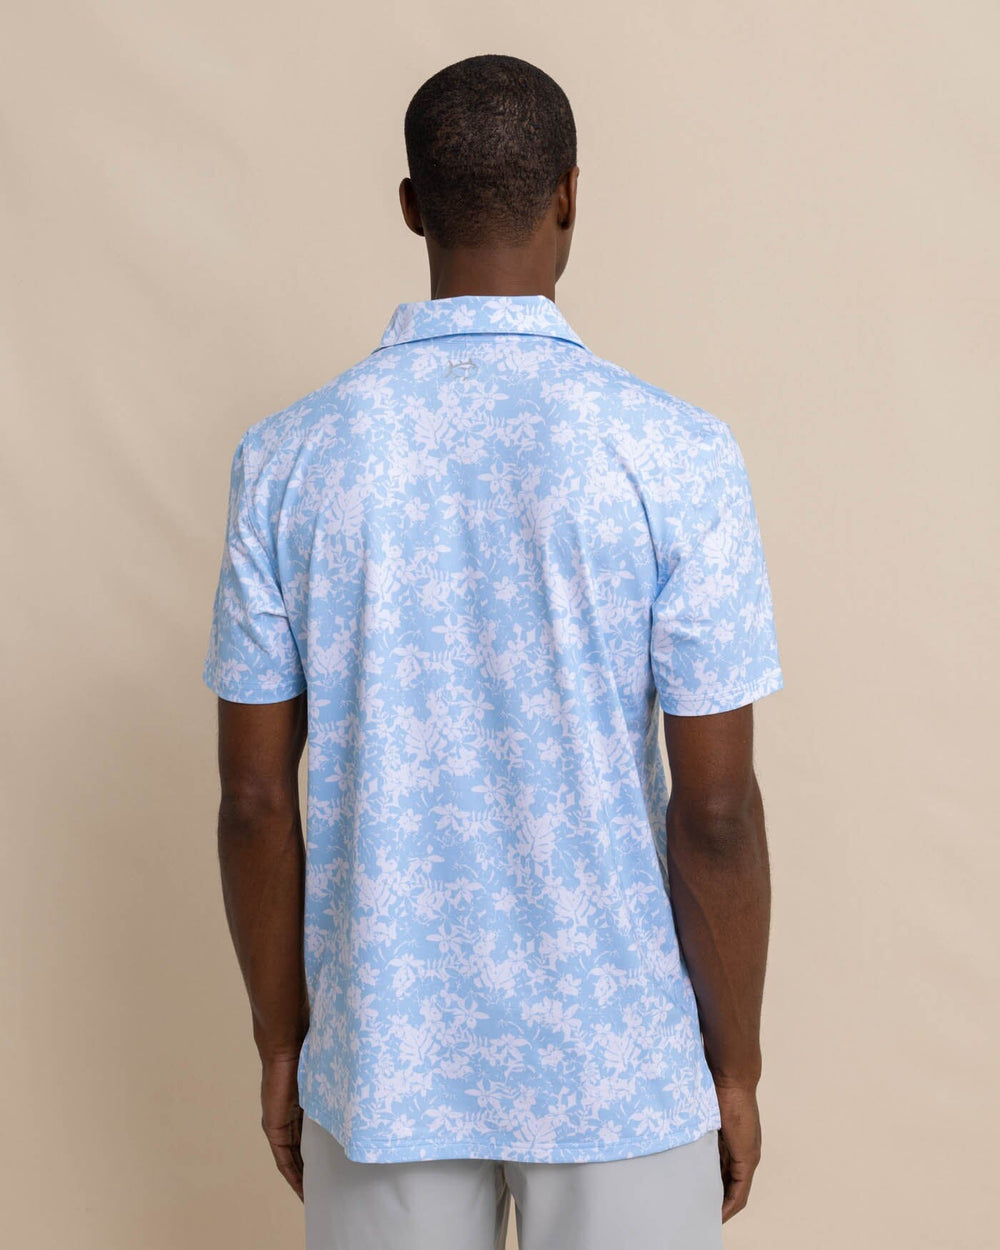 The back view of the Southern Tide Driver Island Blooms Printed Polo by Southern Tide - Clearwater Blue